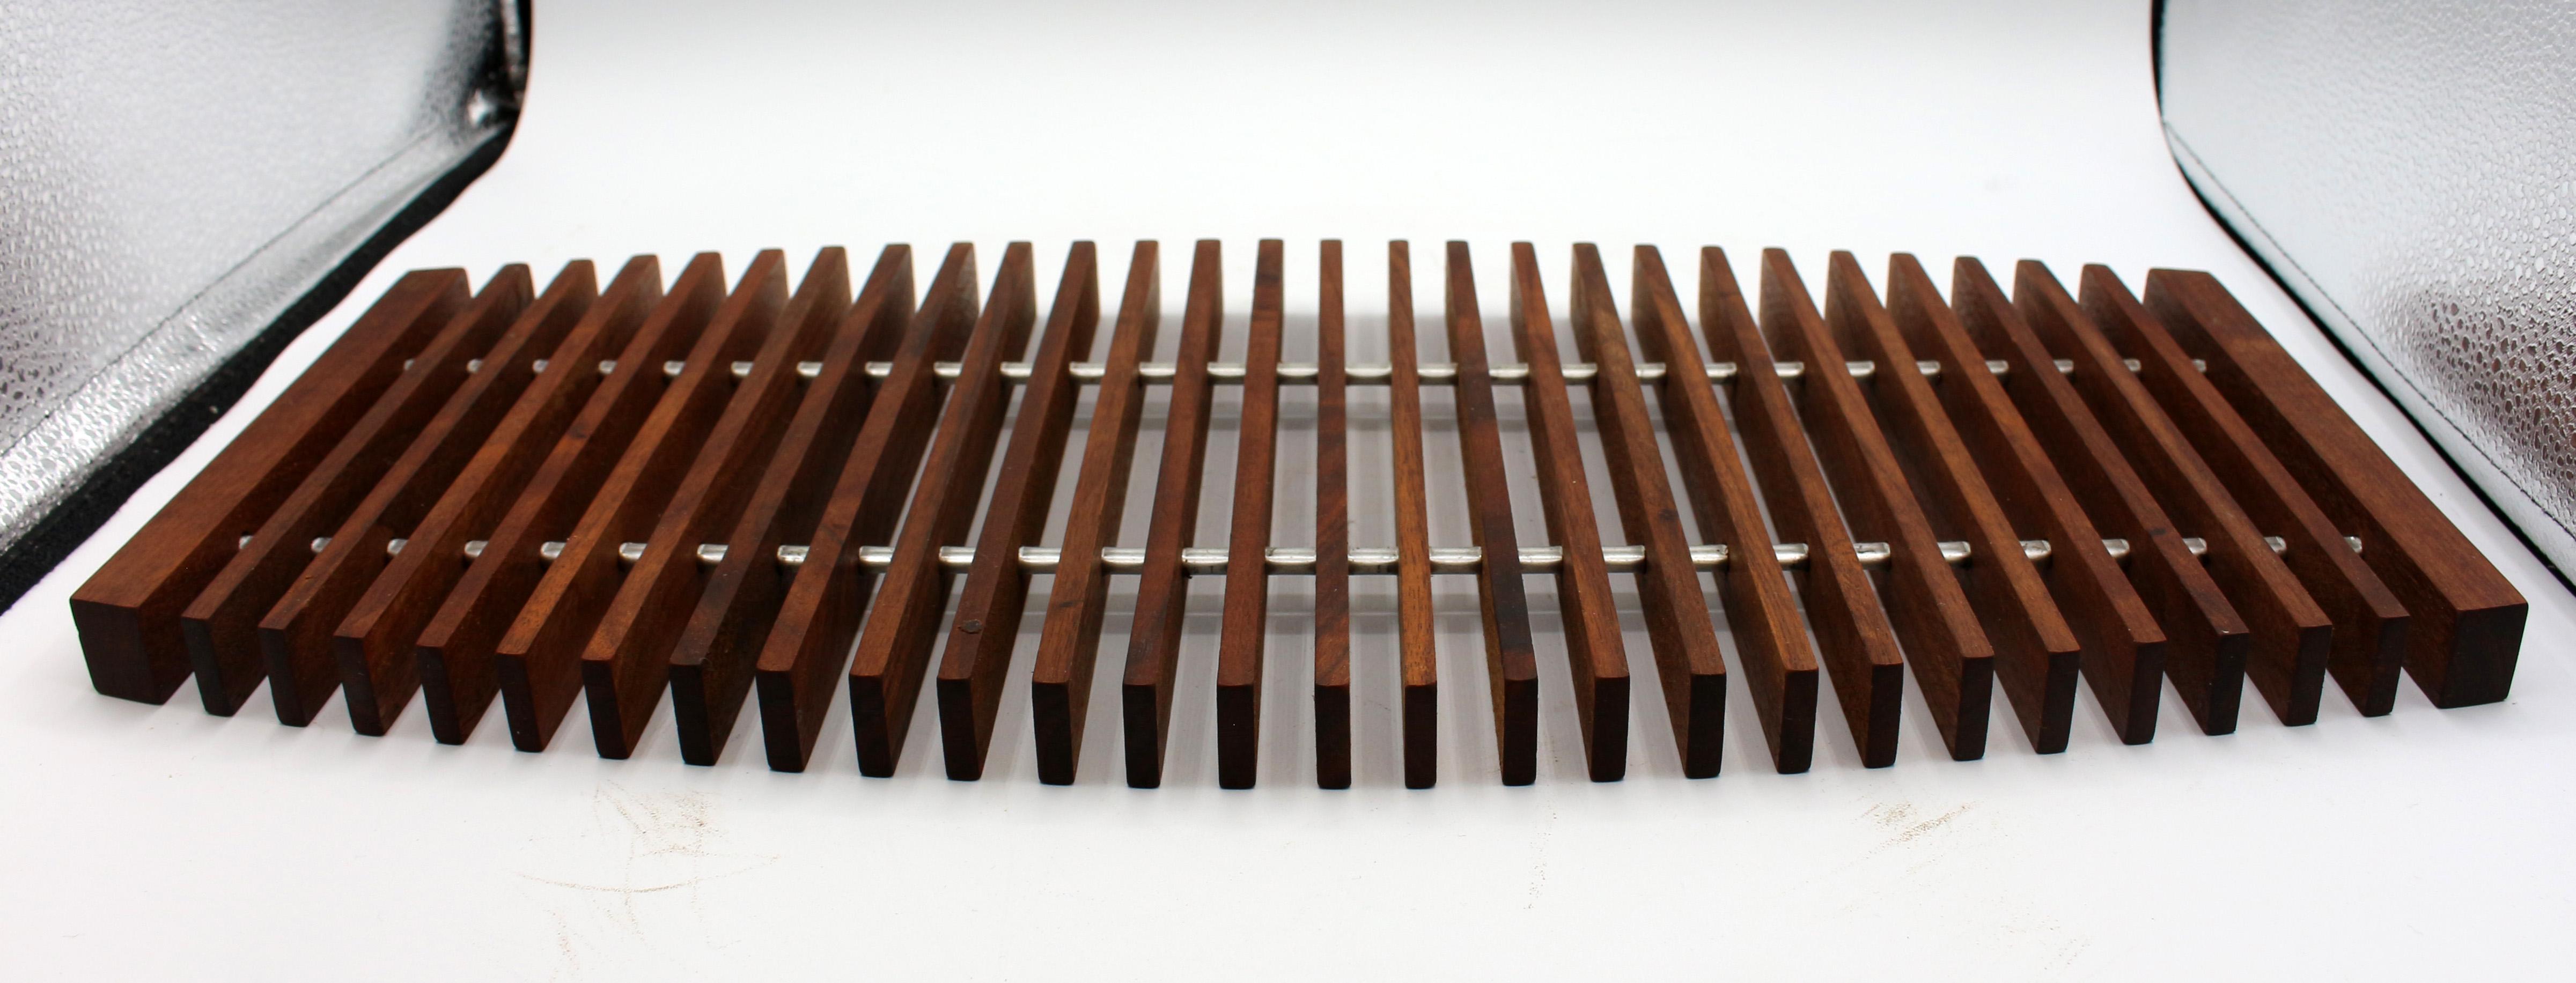 Set of 3 Teak & Aluminum Fishbone Trivets, Mid Century Modern, Danish In Good Condition For Sale In Chapel Hill, NC